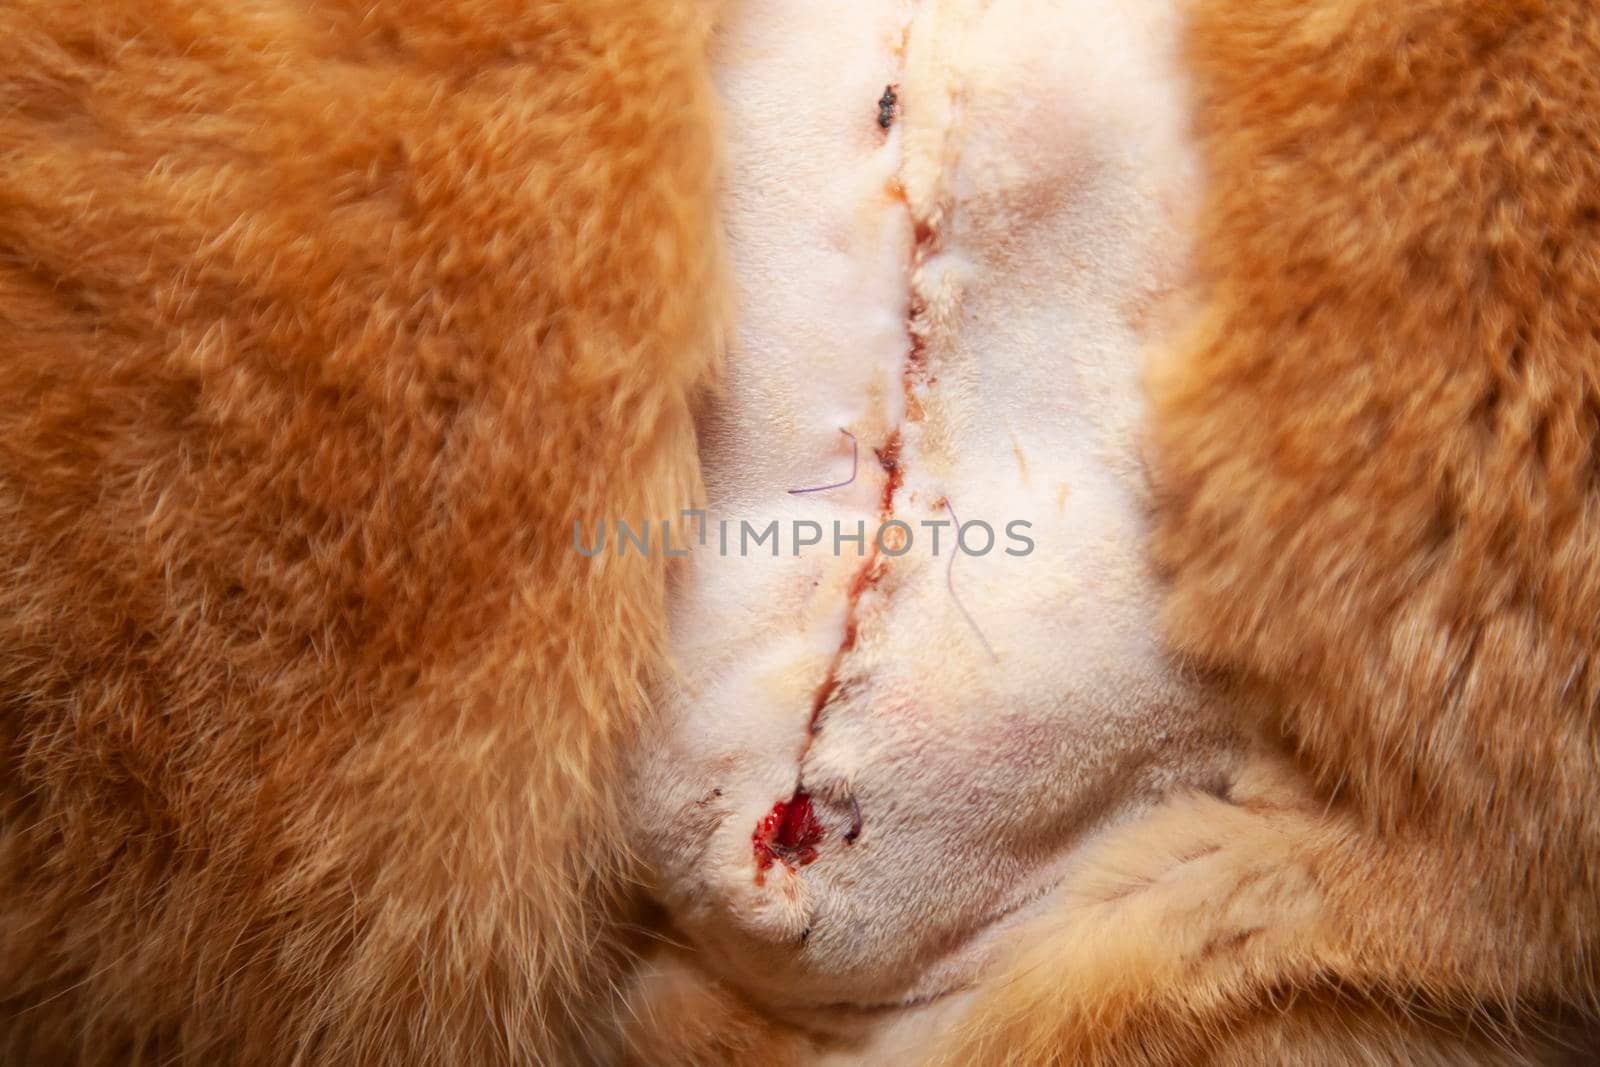 Large surgical cut on a golden cat with a busted purple stitch